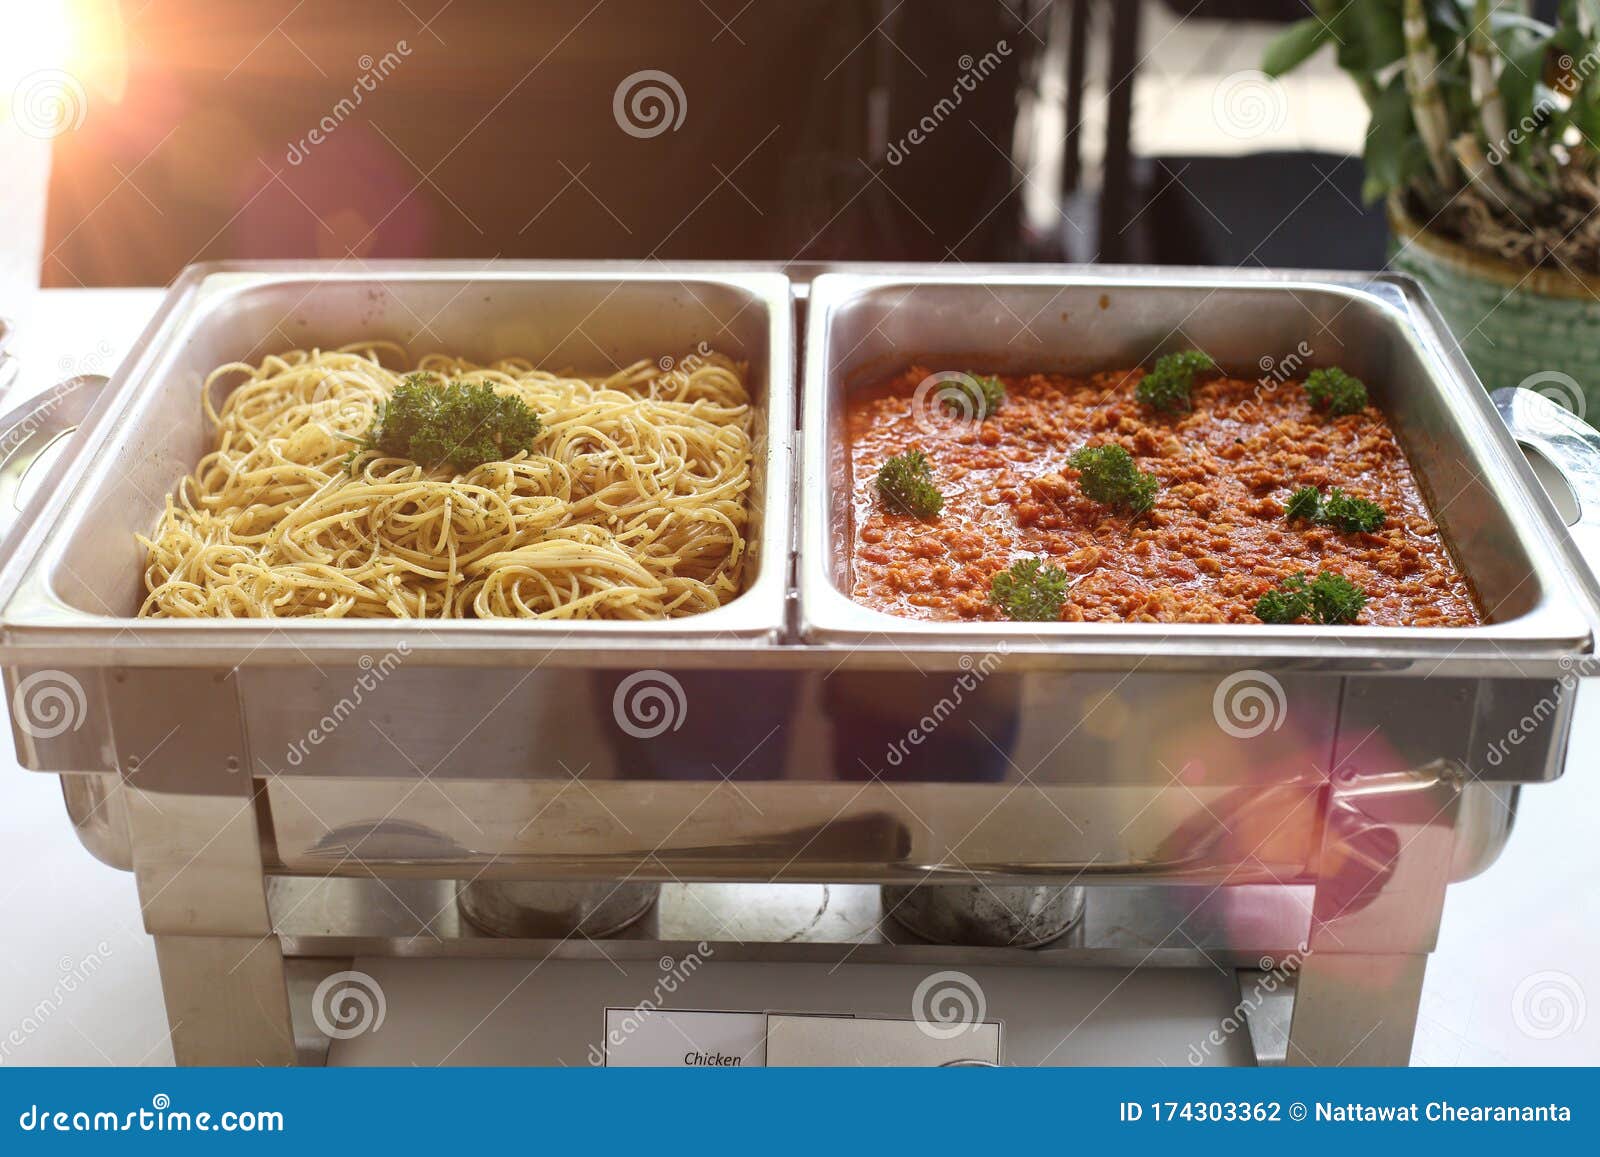 Catering Buffet Served On Table For Spaghetti Sauce Tastes Better From Scratch And Food Buffet Catering Plate Ready To Stock Photo Image Of Pepper Fresh 174303362